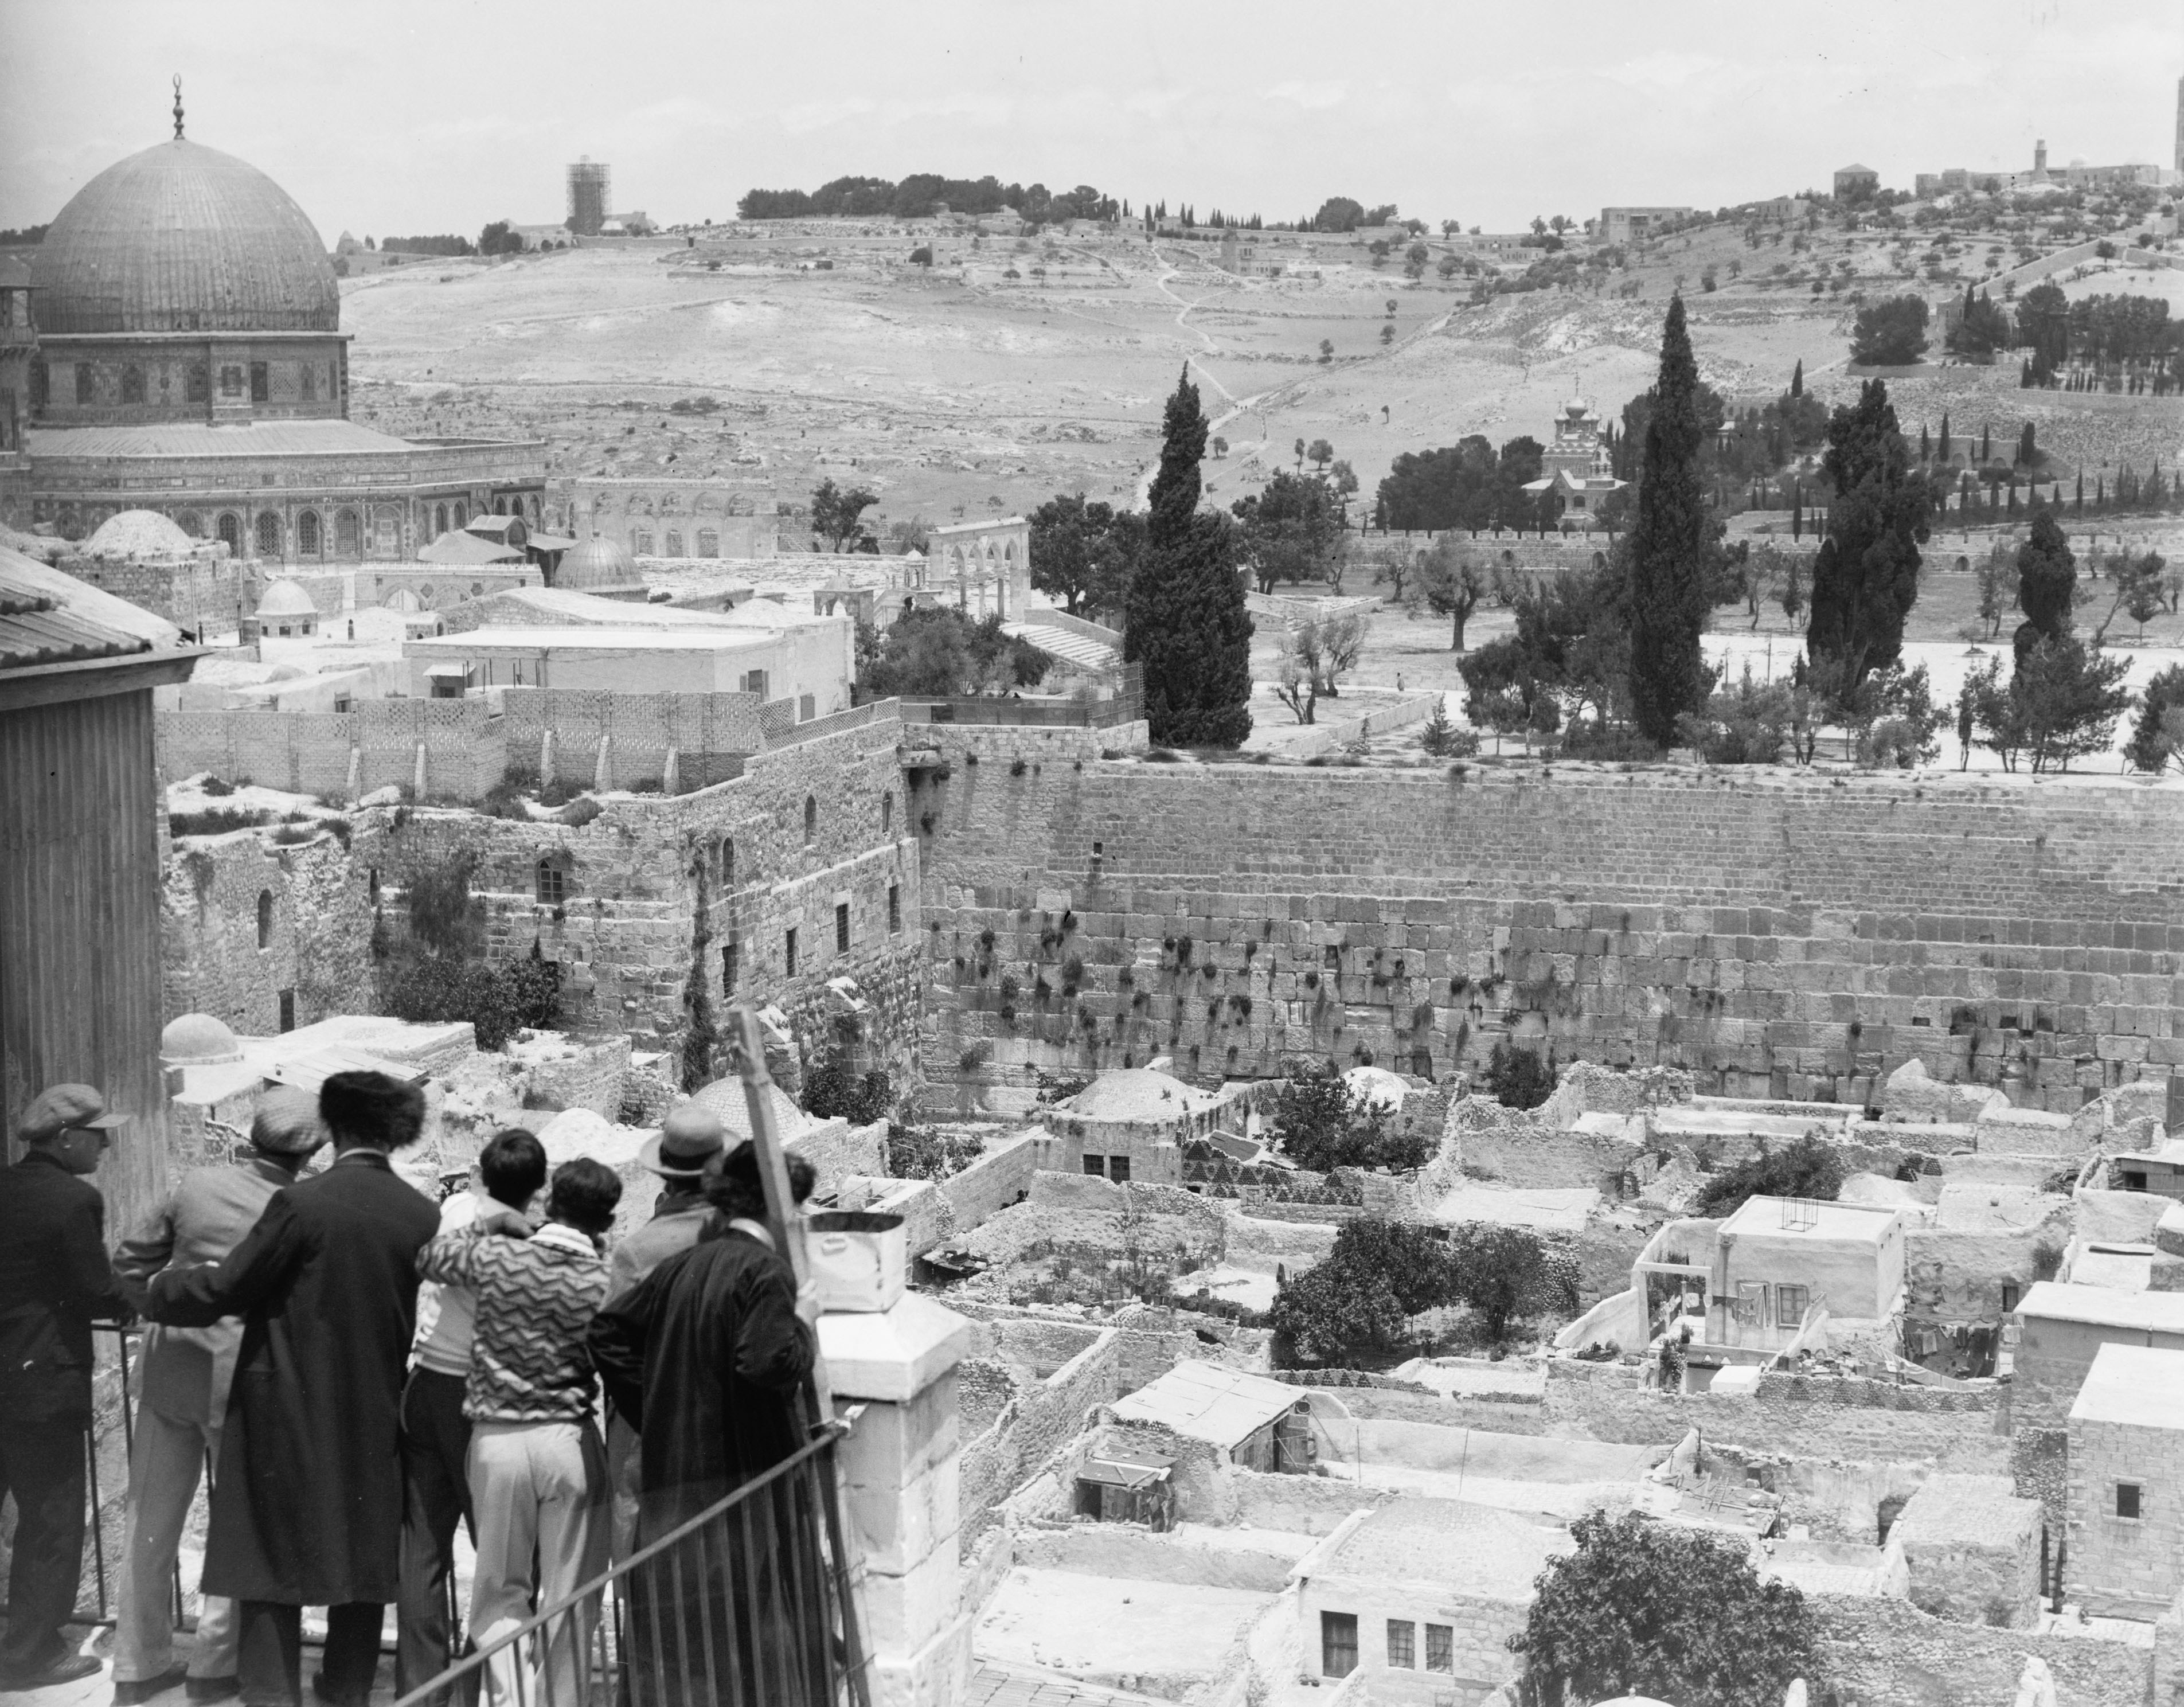 Photographs of the Western Wall